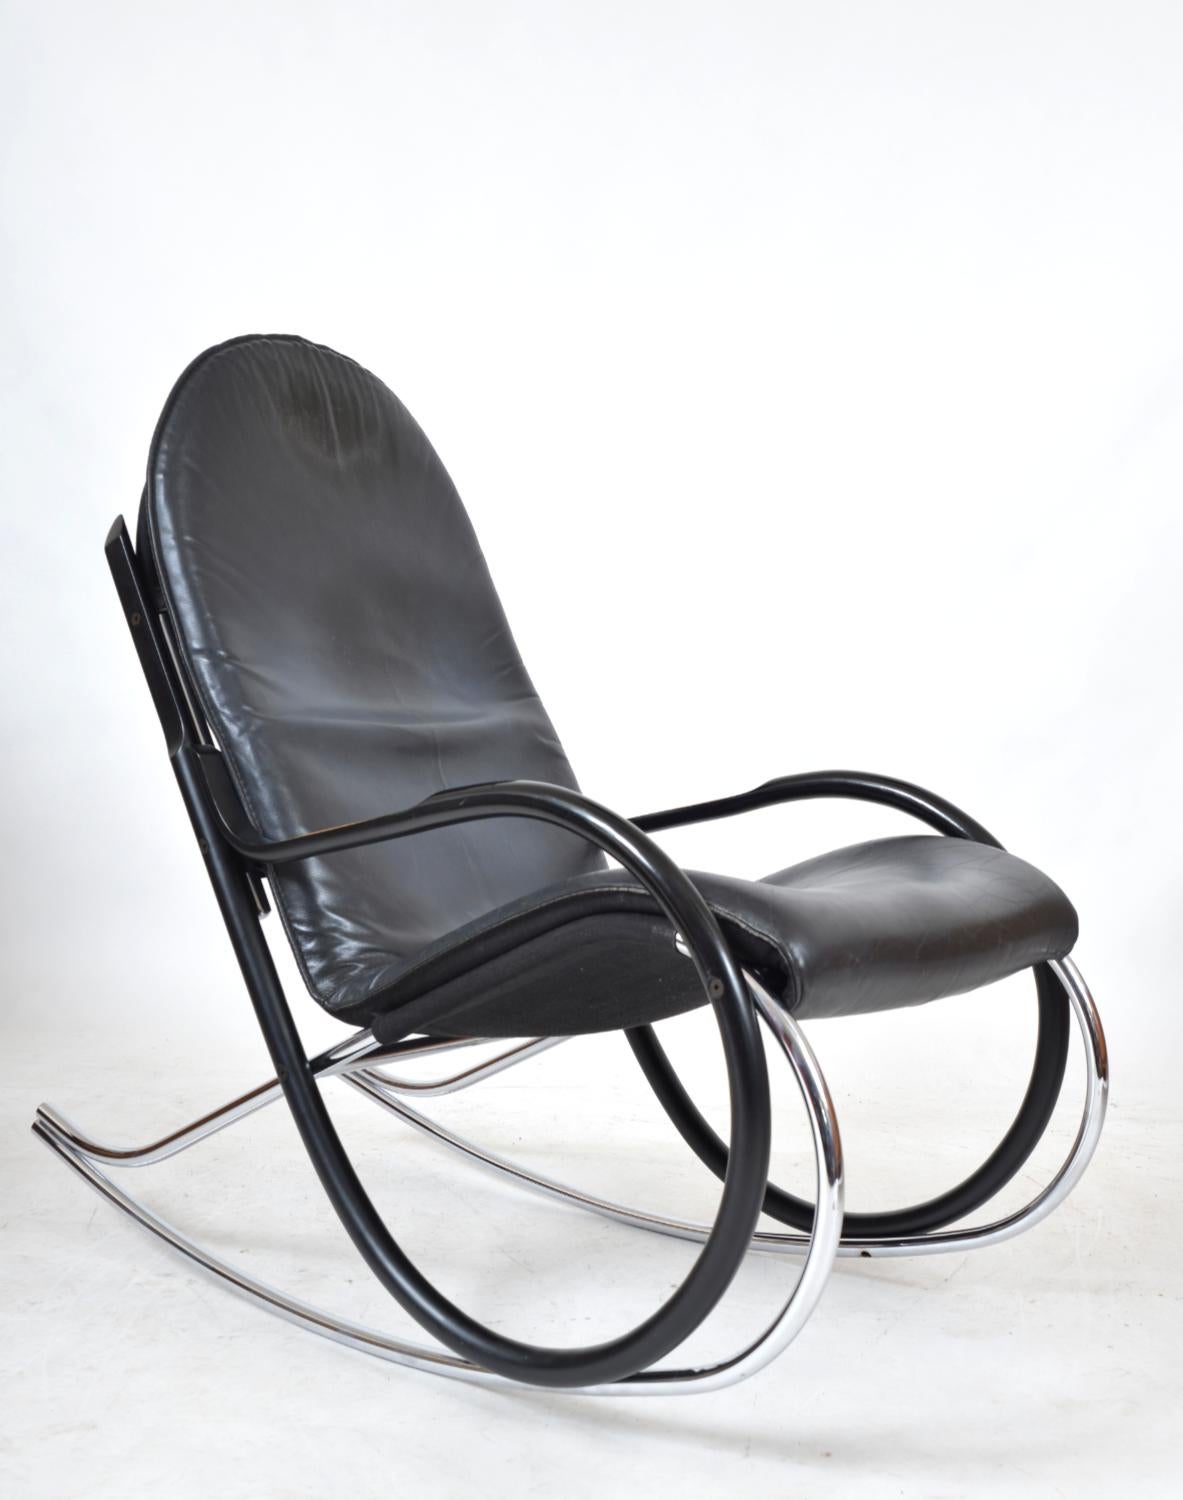 1970s Paul Tuttle Nonna Rocking Chair for Strässle International Chrome Rocker In Good Condition For Sale In Sherborne, Dorset